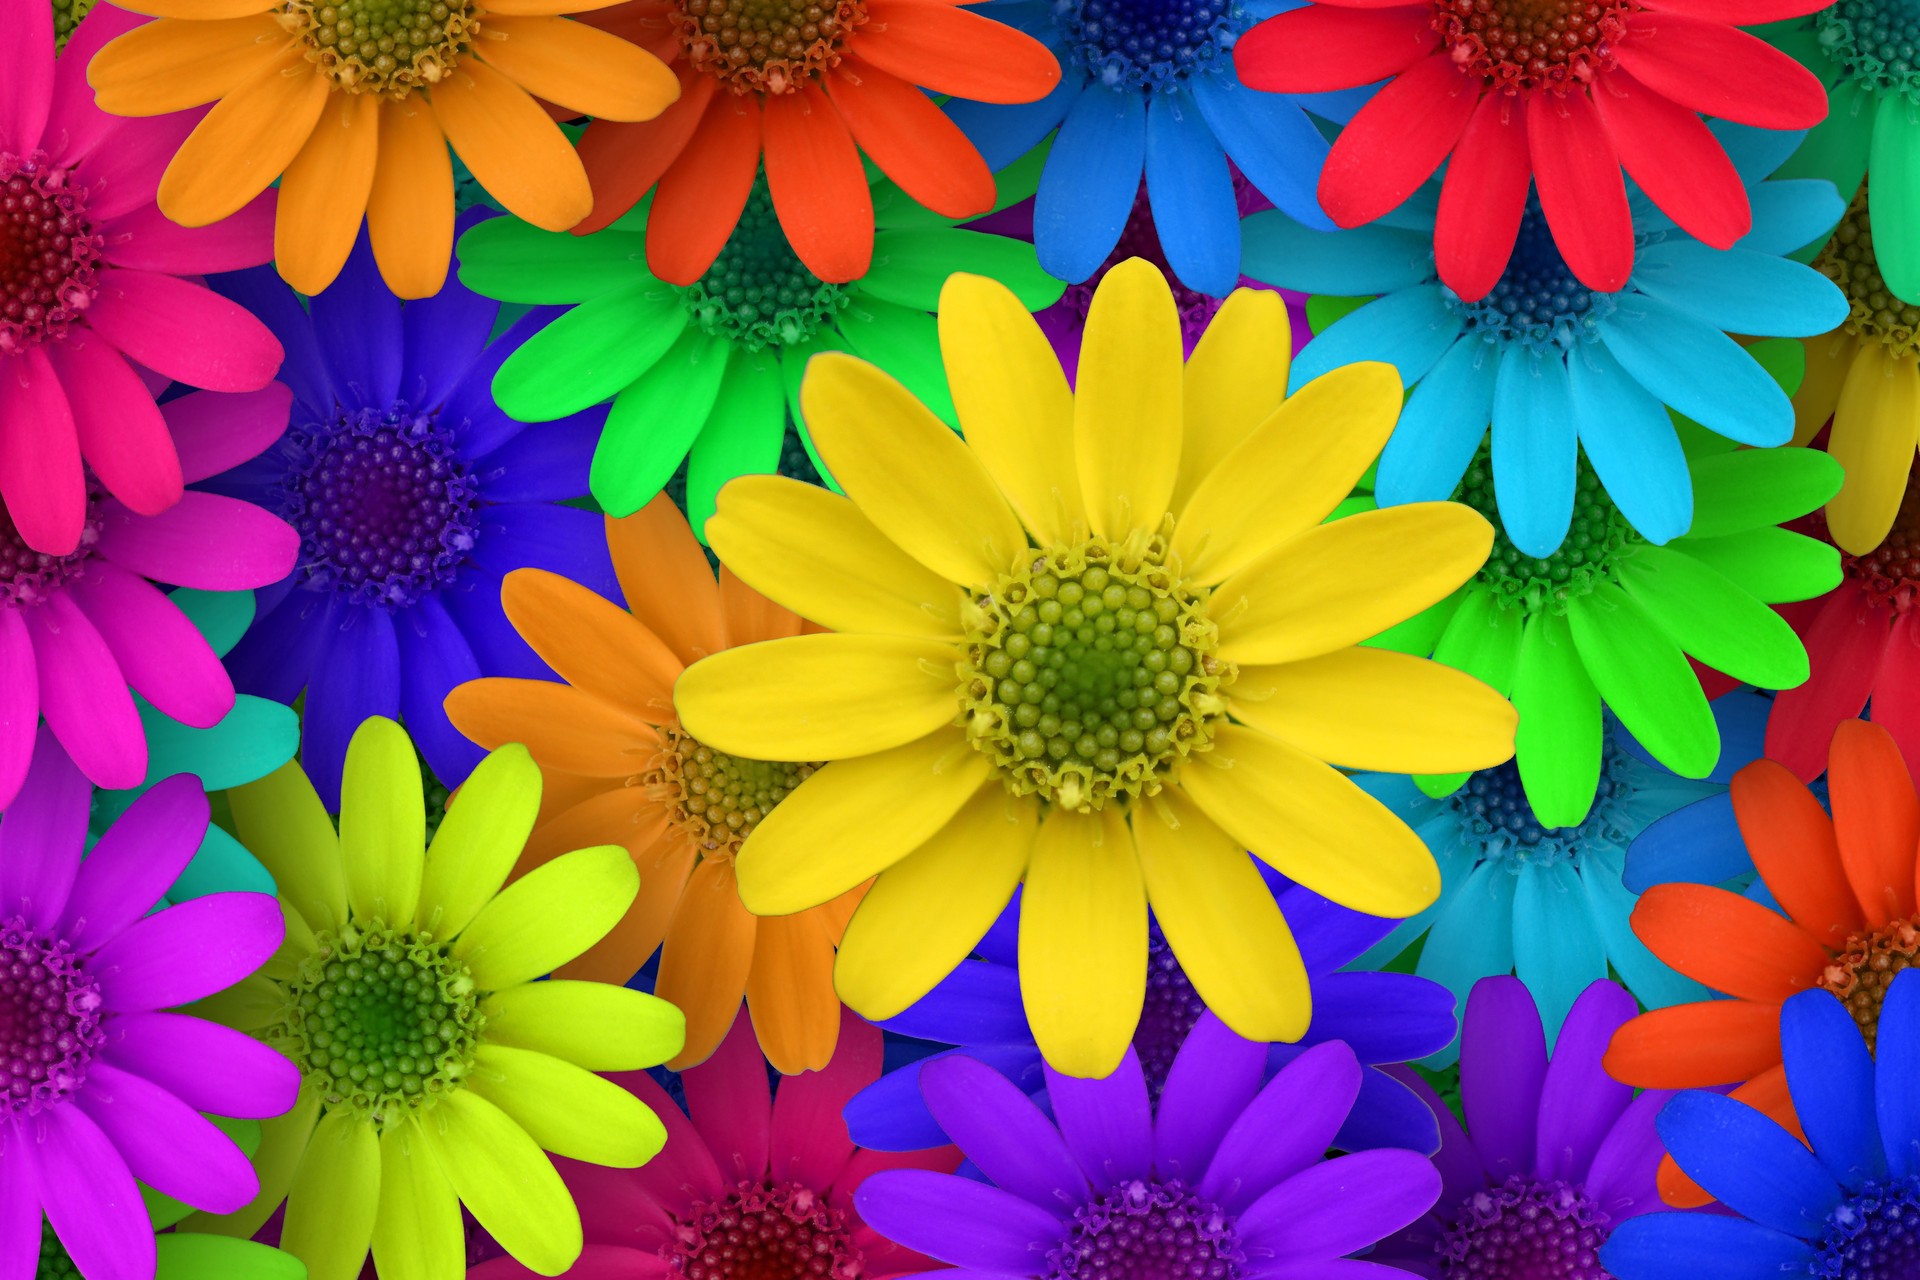 Colorful Flower Images Hd Hd Wallpaper Colorful Flowers Hd Wallpaper